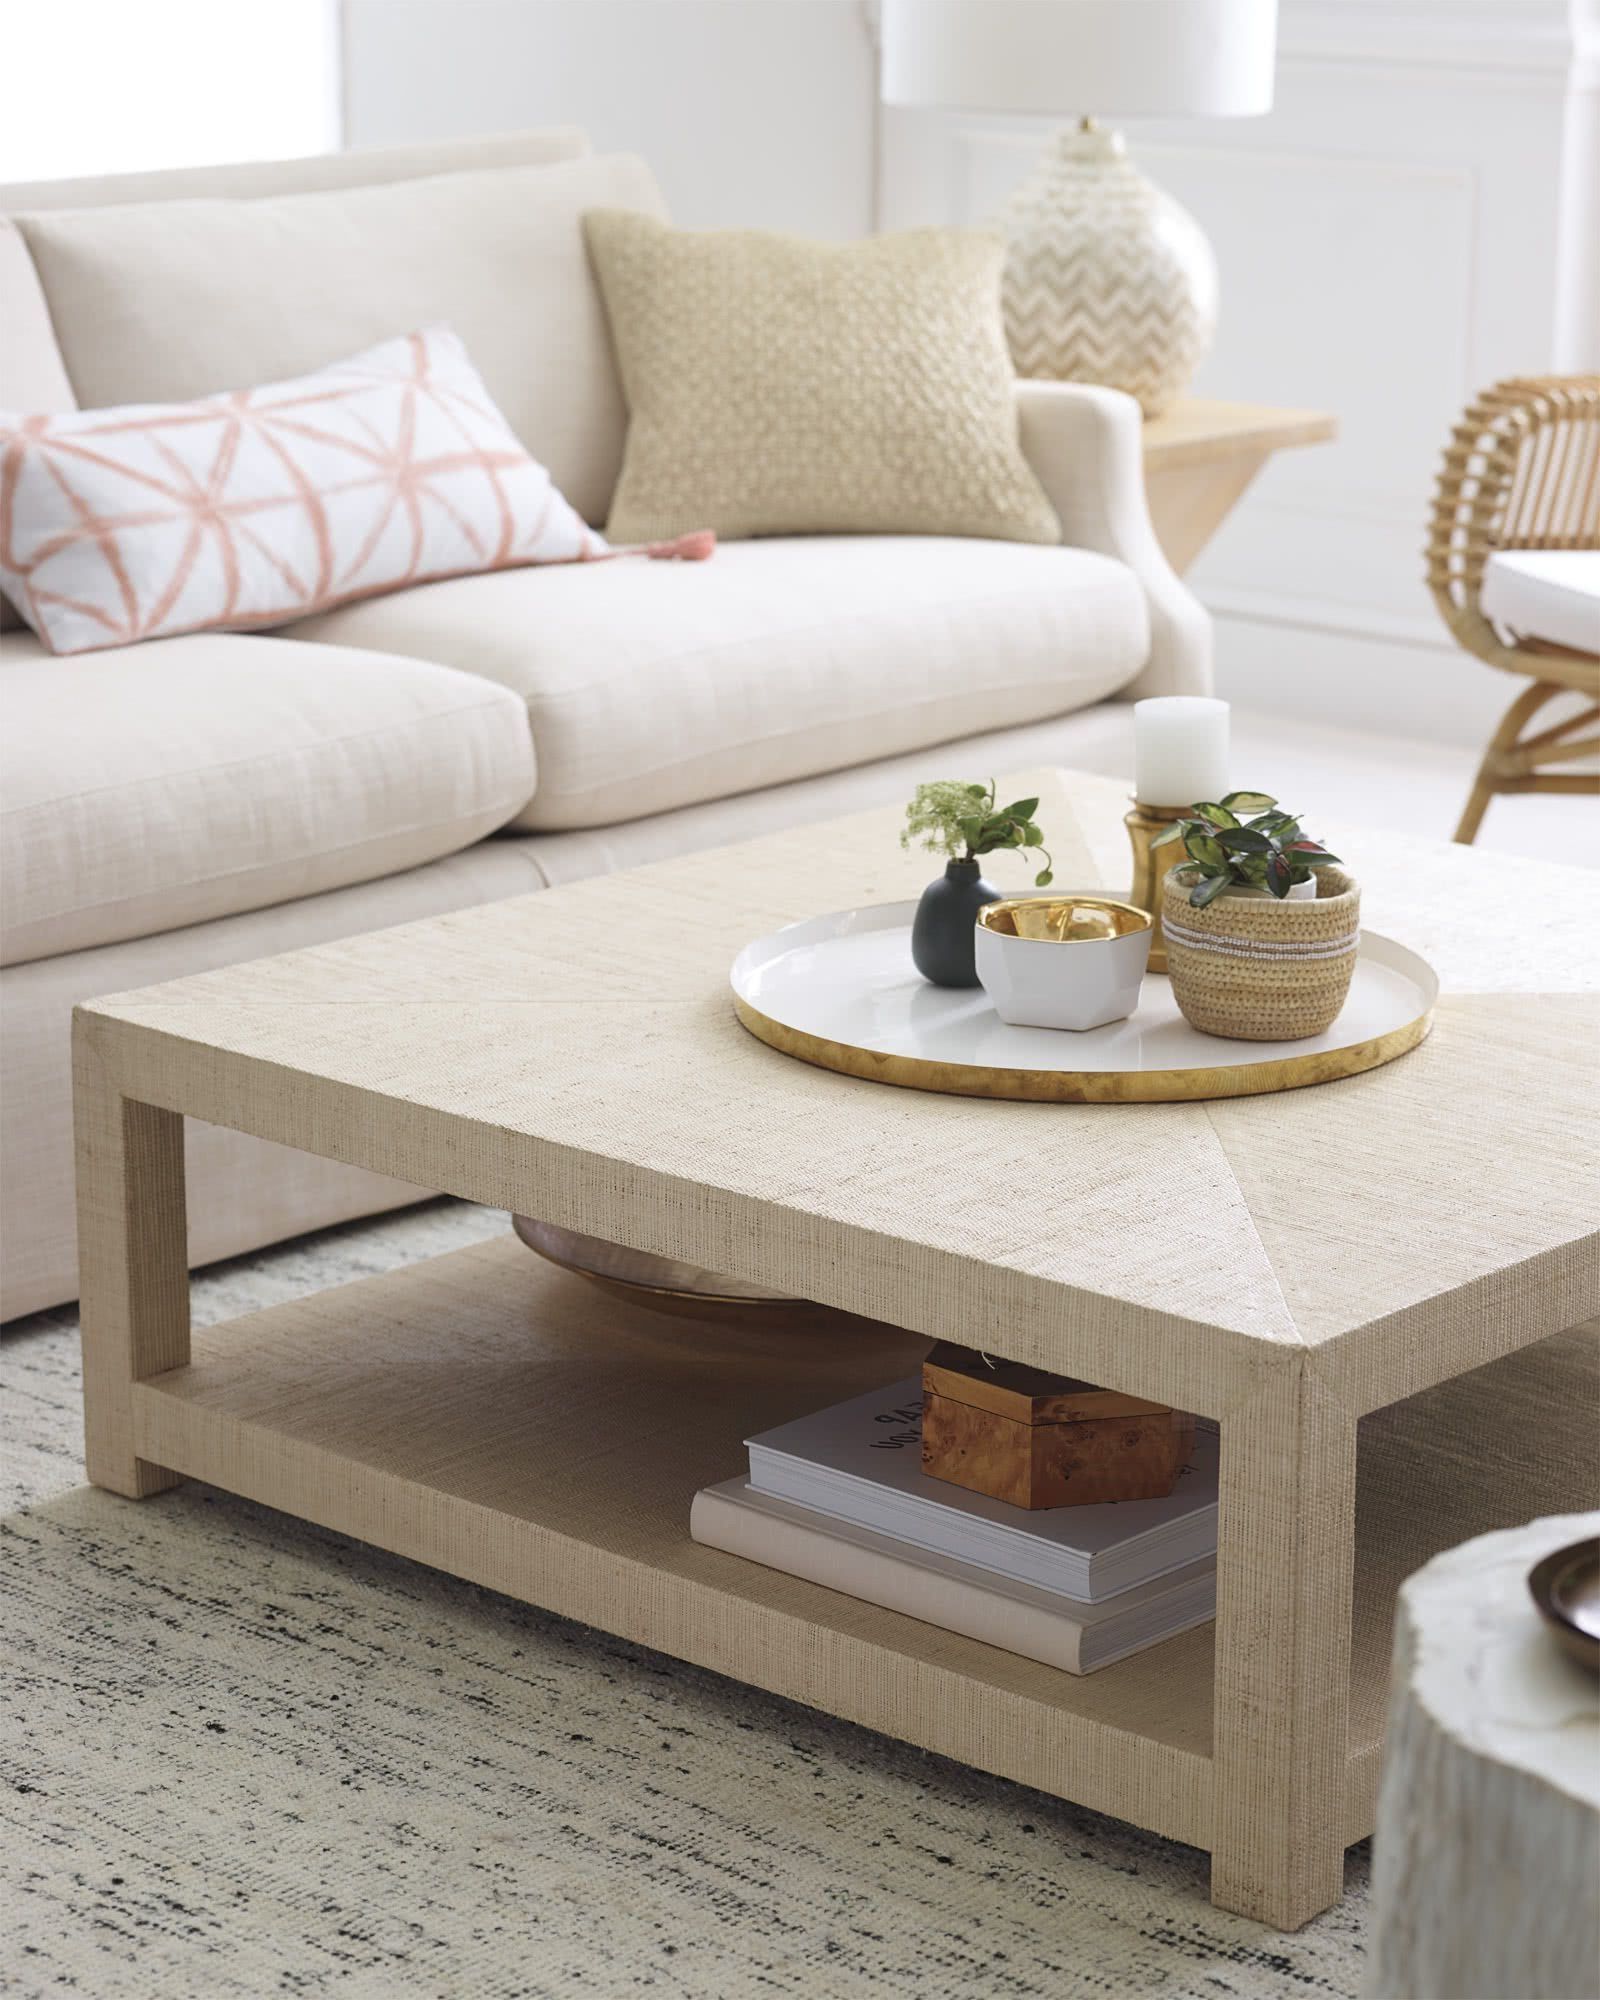 How To Decorate Your Square Coffee Table With Style – Coffee Table Decor For Well Liked Transitional Square Coffee Tables (View 10 of 15)